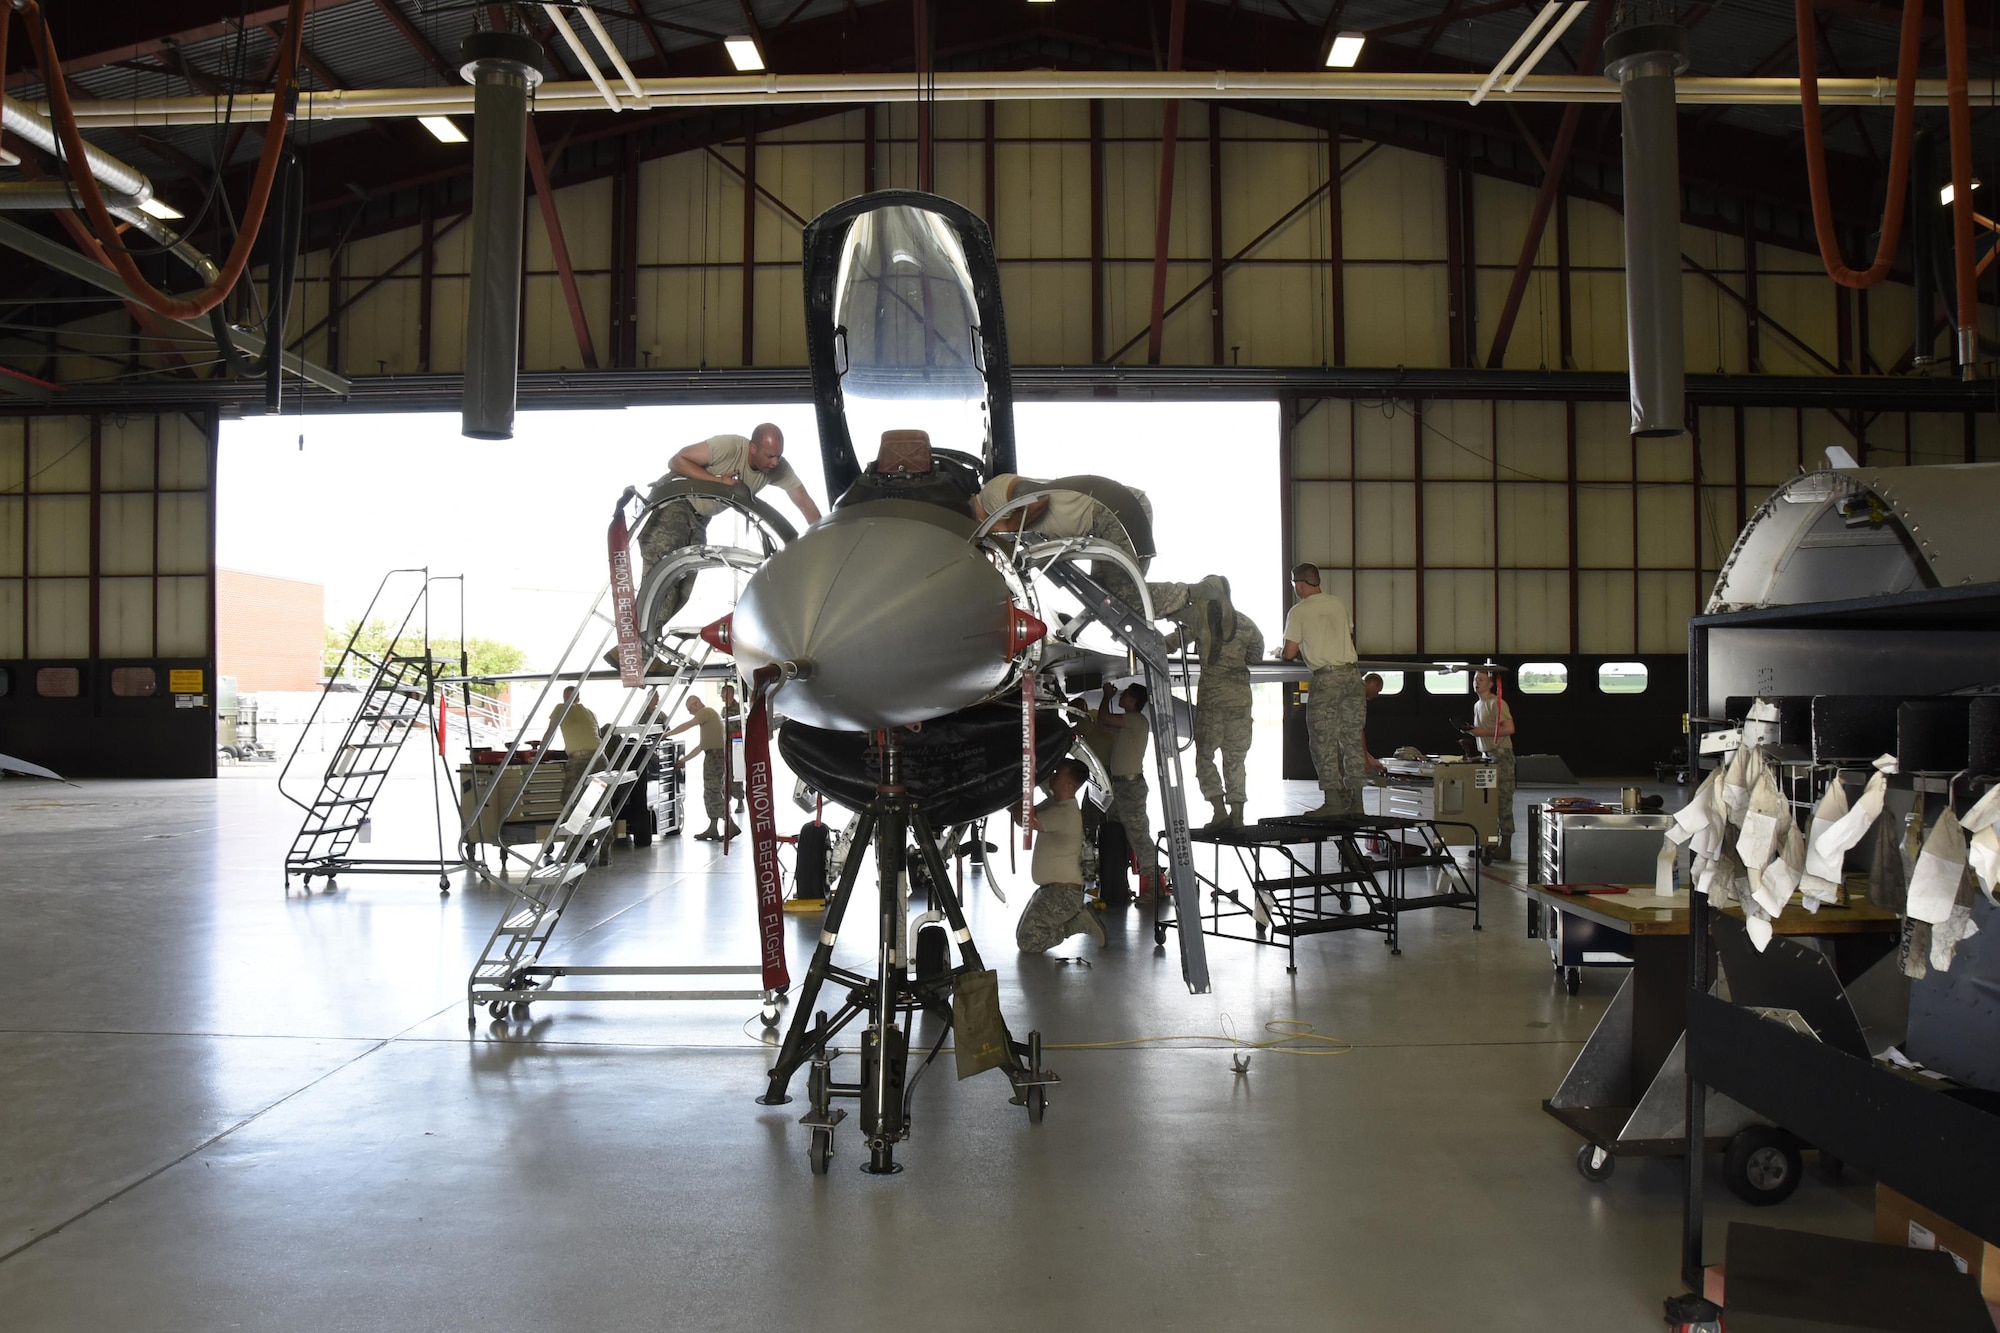 Airmen of 114th Aircraft Maintenance Squadron phase inspection element removed paneled from an F-16 during the De-paneling Phase of a phase maintenance inspection at Joe Foss Field, July 8, 2017.  Each aircraft is required to go through a phase inspection every 400 flight hours to ensure all systems are functioning with in Air Force regulations.  (U.S. Air National Guard photo by Master Sgt. Christopher Stewart/Released)